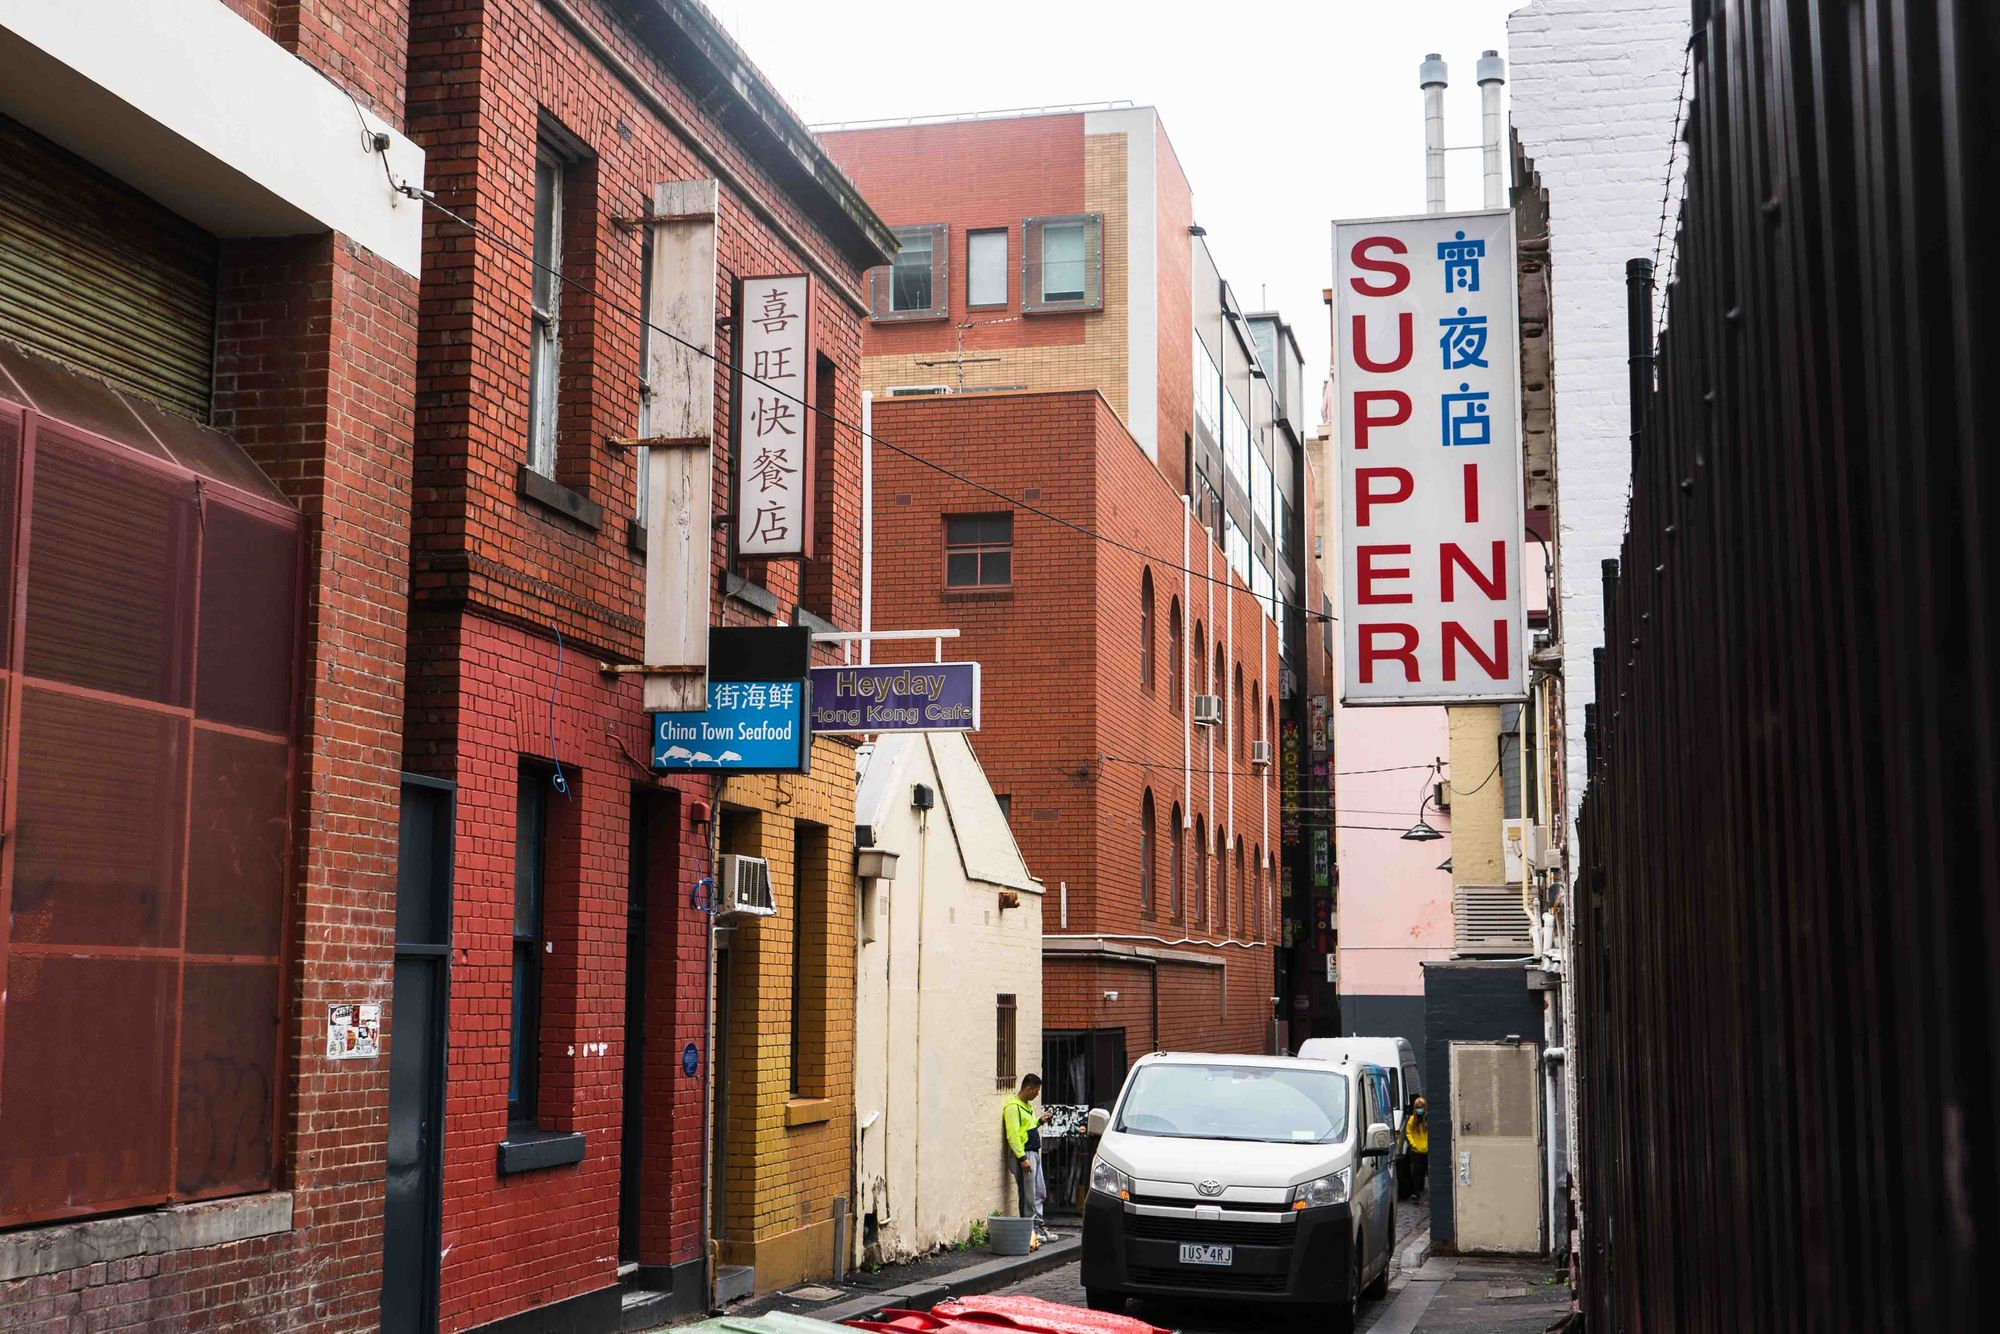 One Or Two is opposite Melbourne institution, Supper Inn. Photo: Boothby